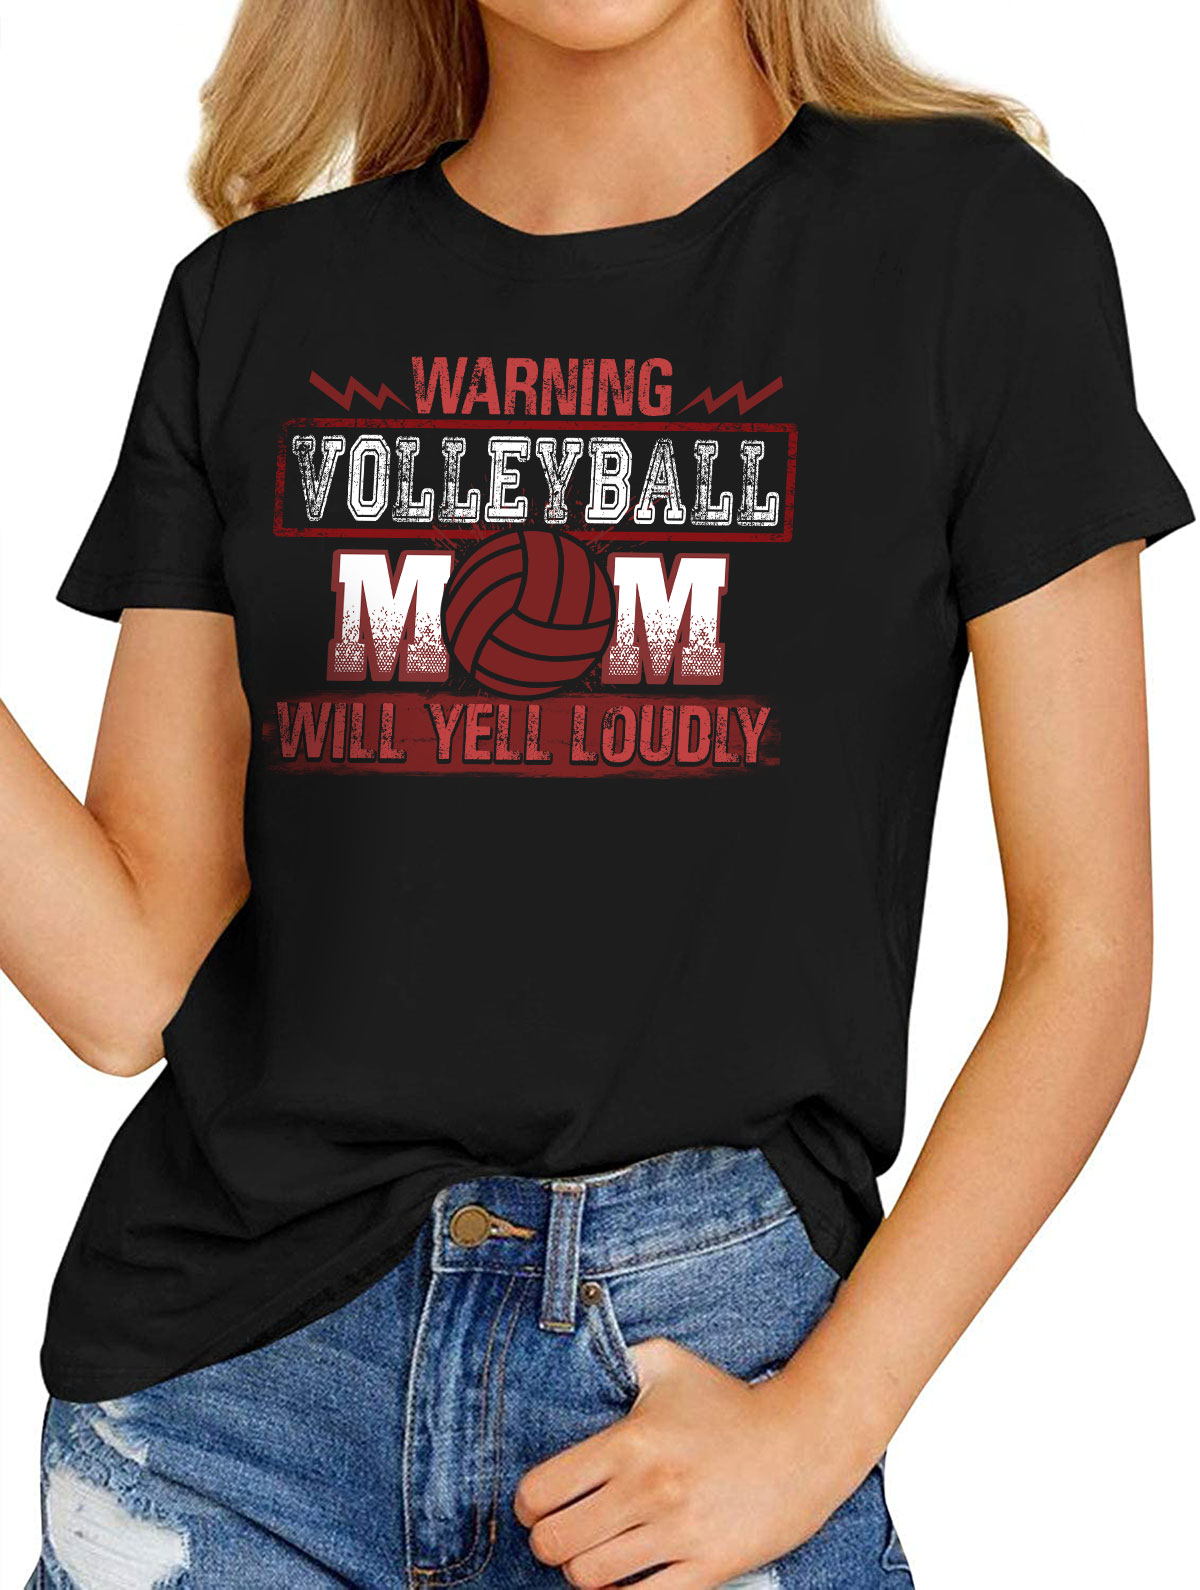 Women's Fashion T-Shirts – Will Yell Loudly Volleyball Funny Volleyball Mom Gift Shirt – Short Sleeve HomeWix